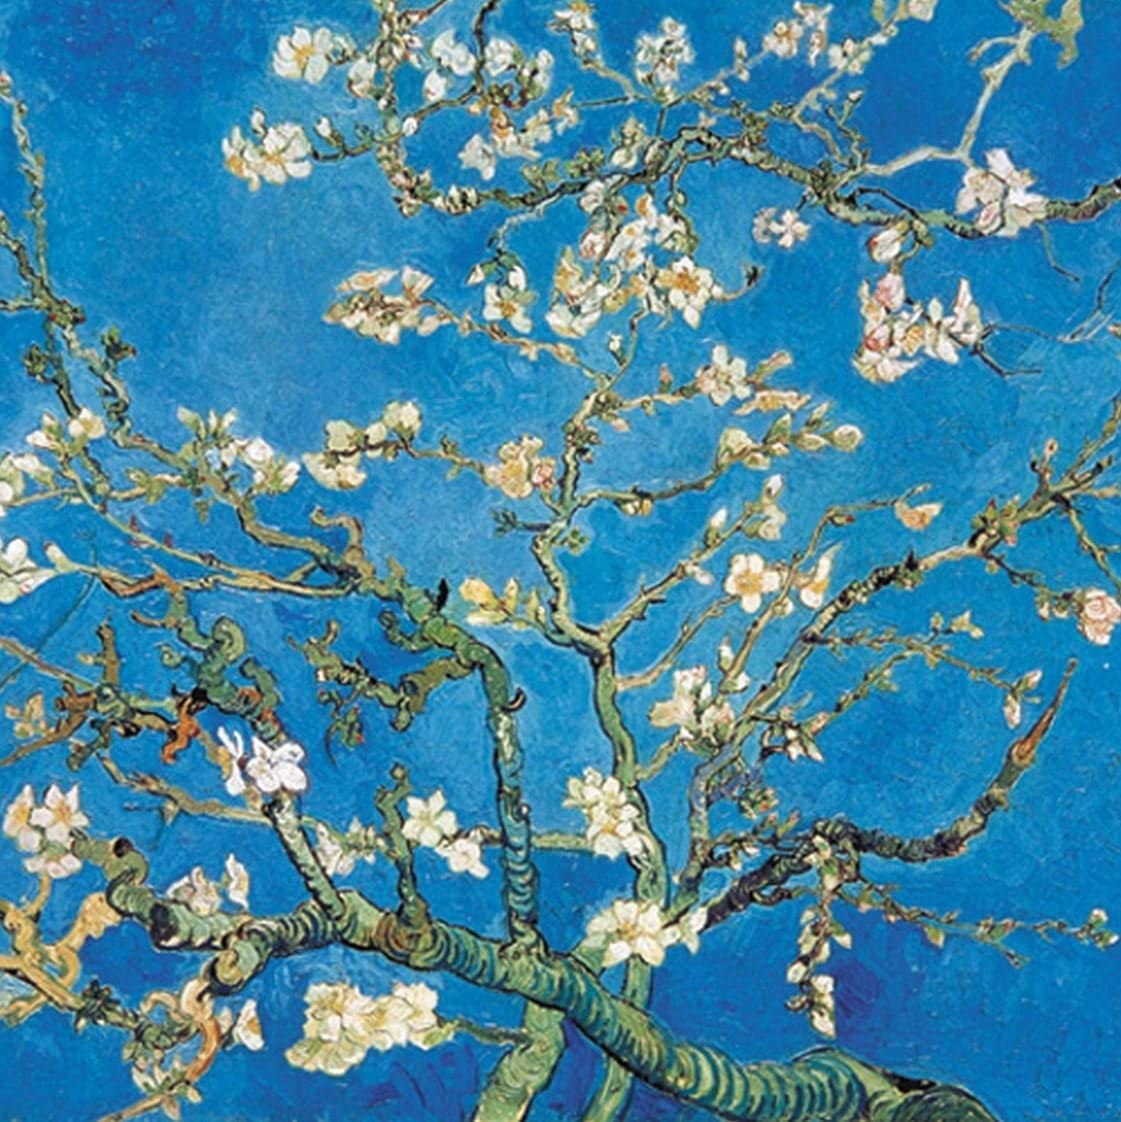 Chamberart 500 Piece Premium Jigsaw Puzzle Almond Tree A 5099 By Vincent Van Gogh, Toys & Games